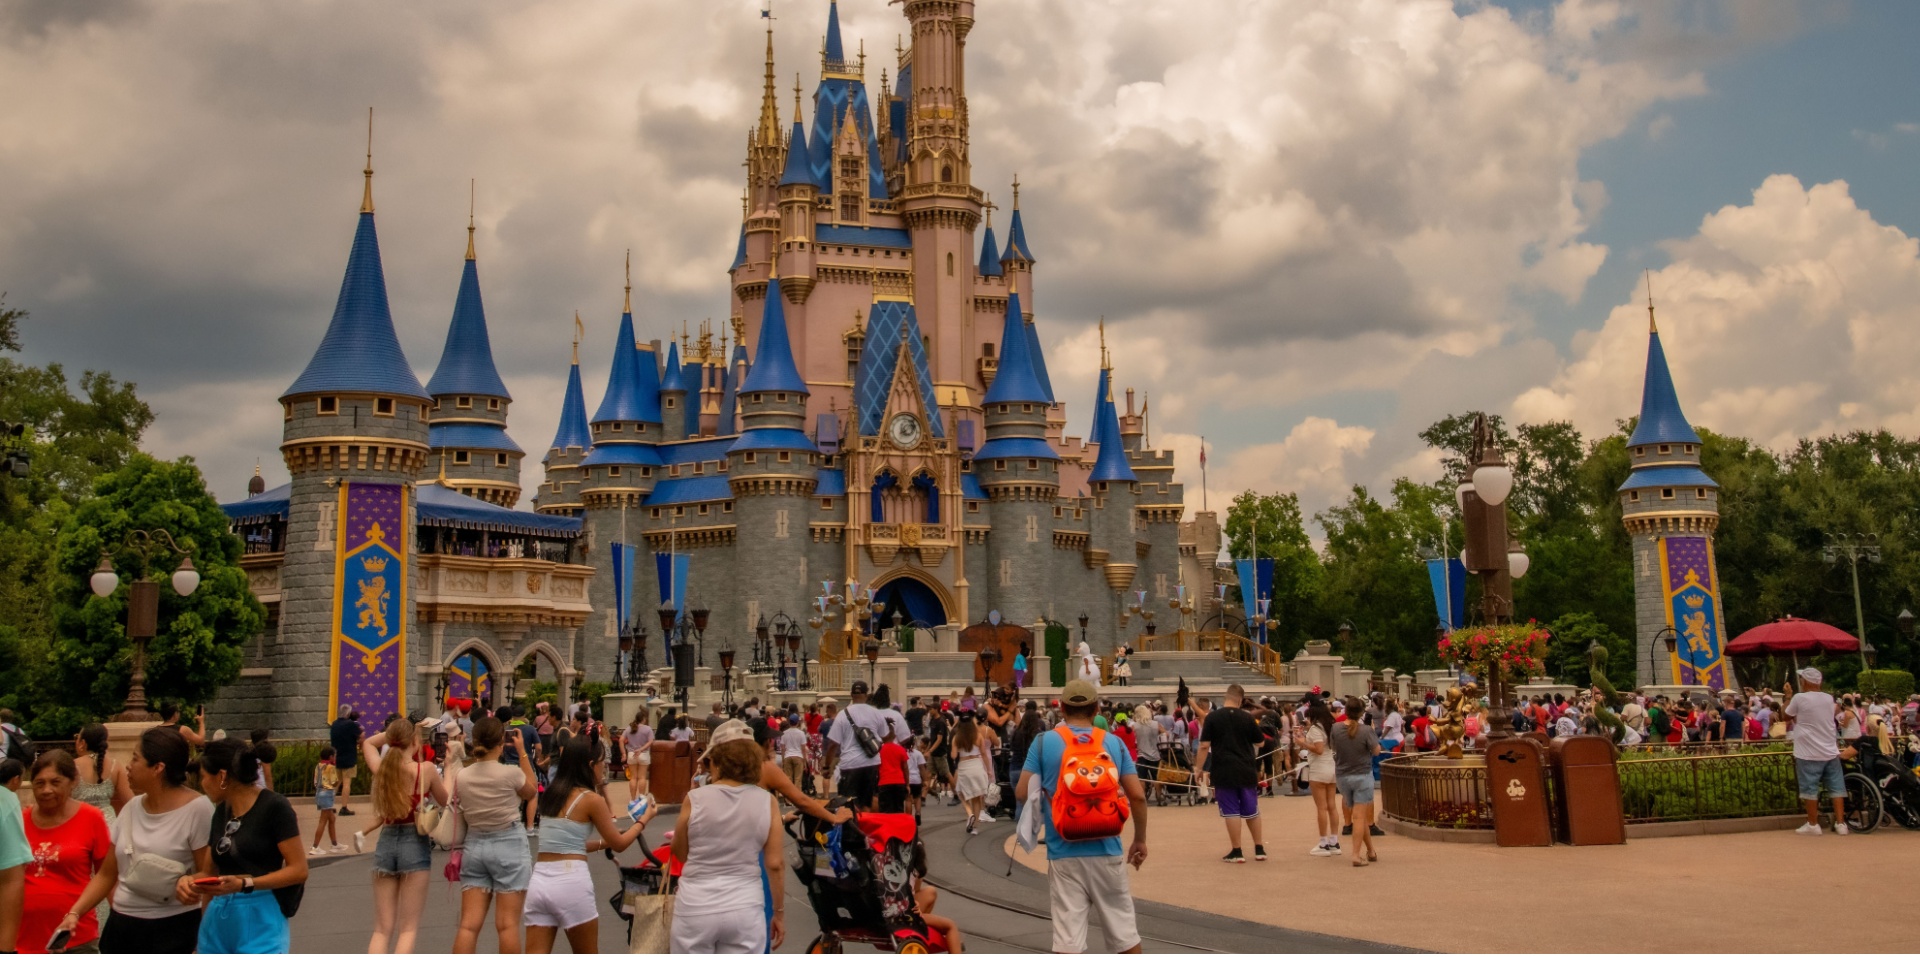 Disney world castle with people in the foreground